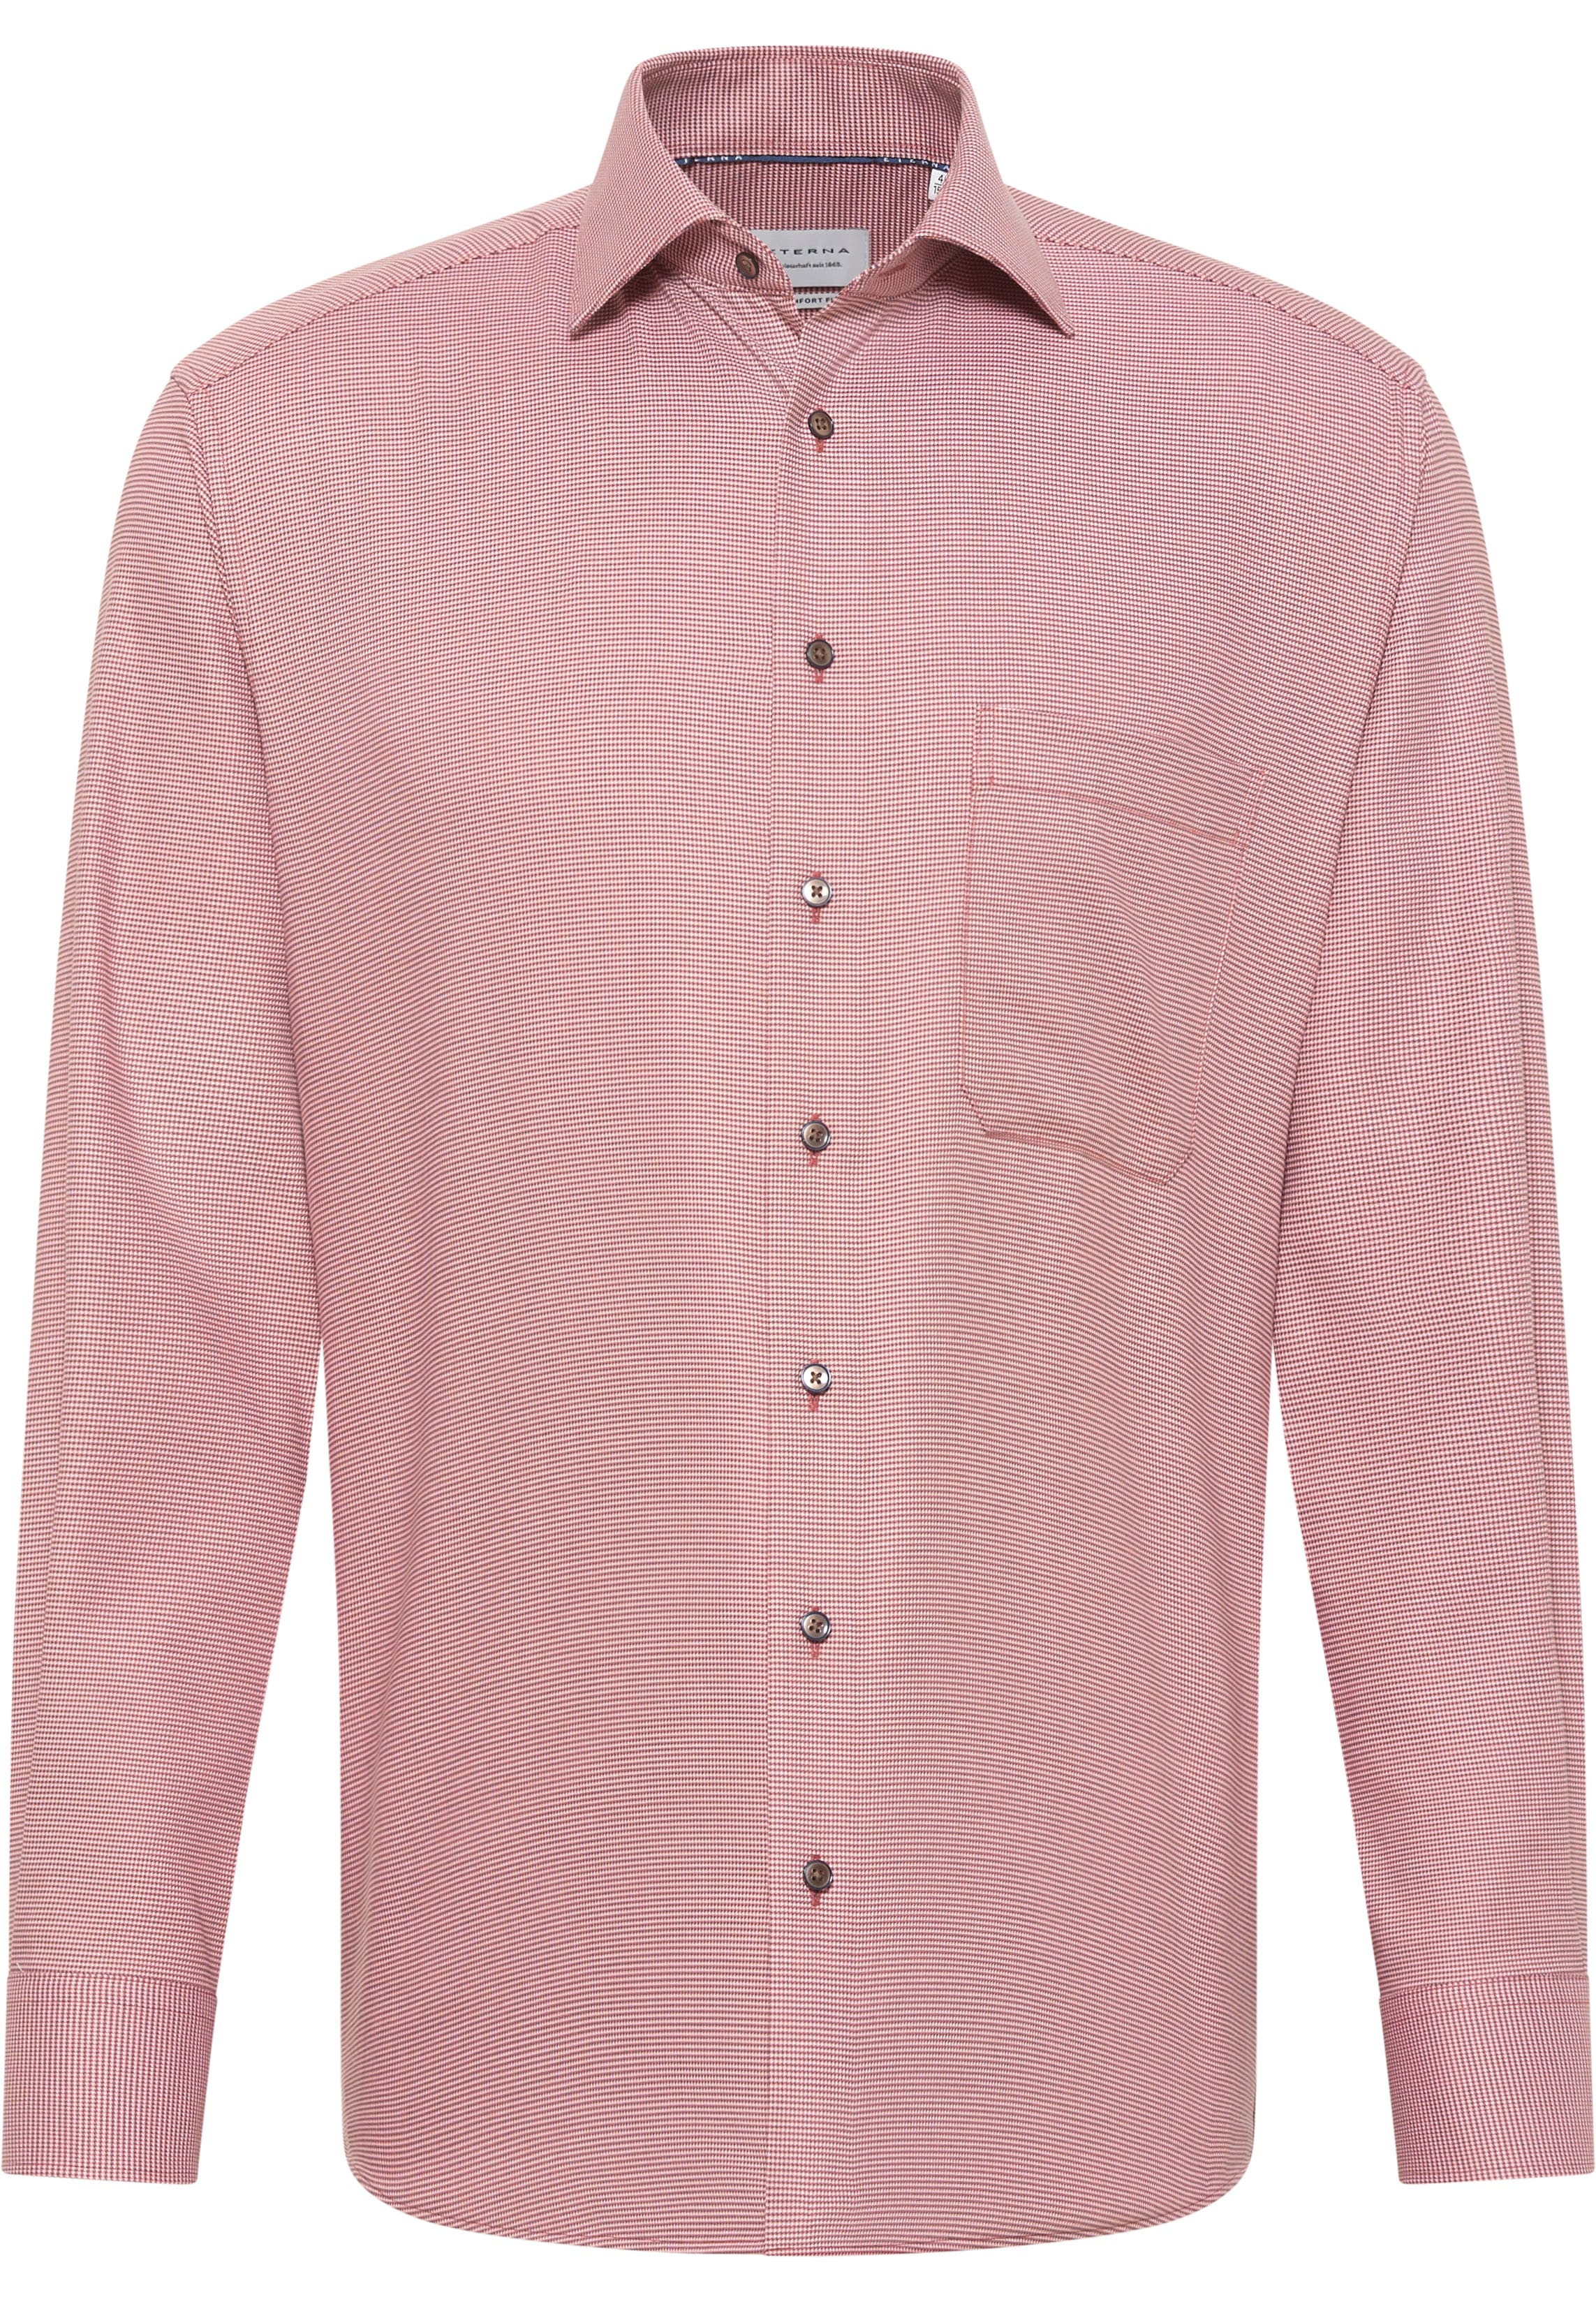 COMFORT FIT Shirt in light red structured